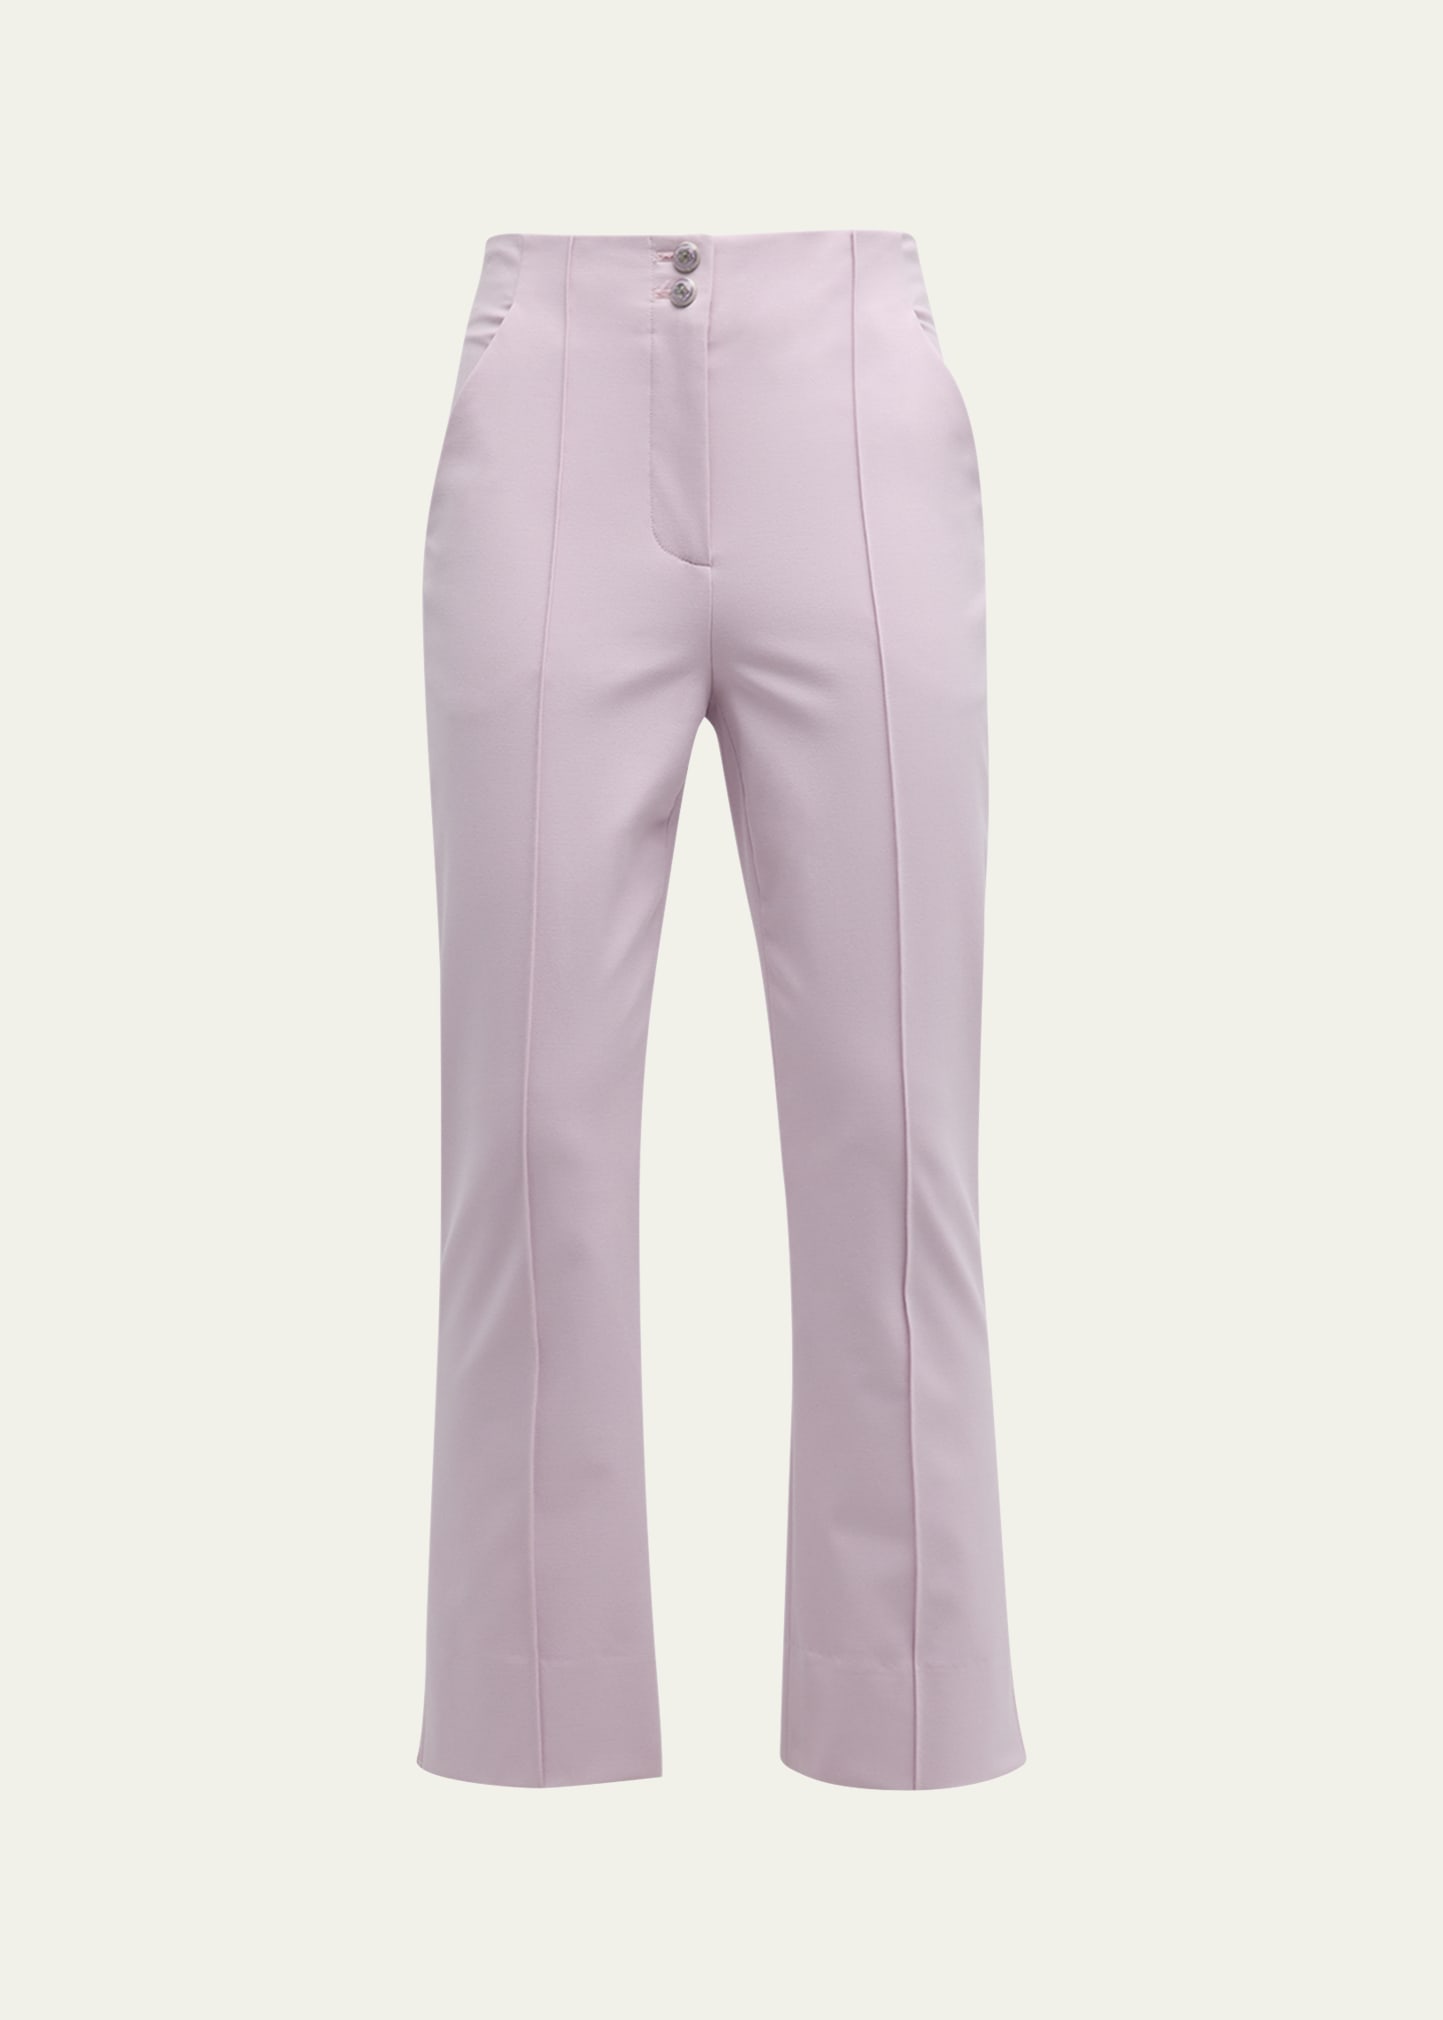 Kean Cropped Tailored Pants